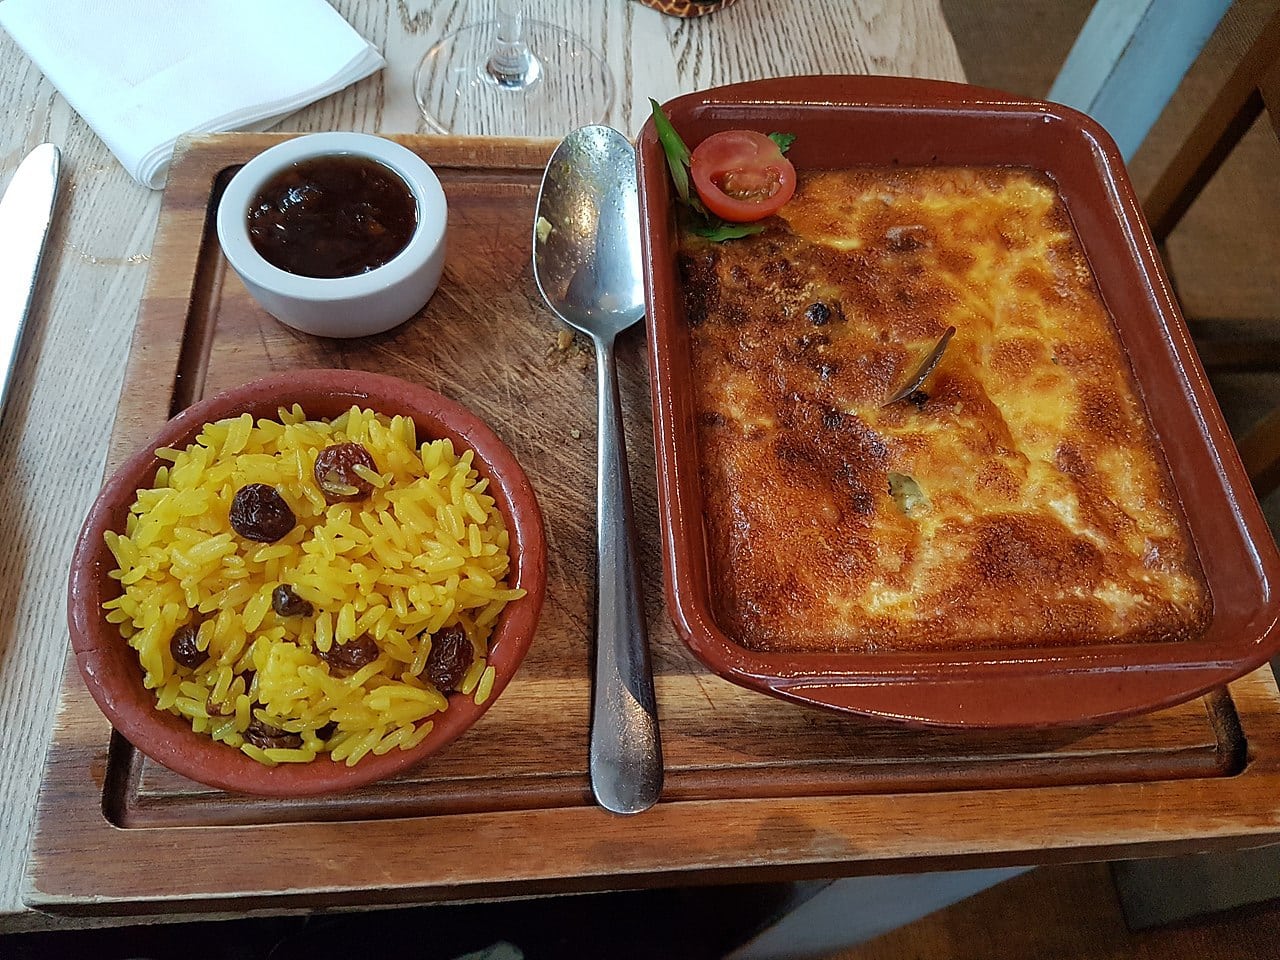 Bobotie with a side of yellow rice and some Mrs Ball’s chutney. Wikipedia CharmaineZoe's Marvelous Melange (CC BY 2.0)